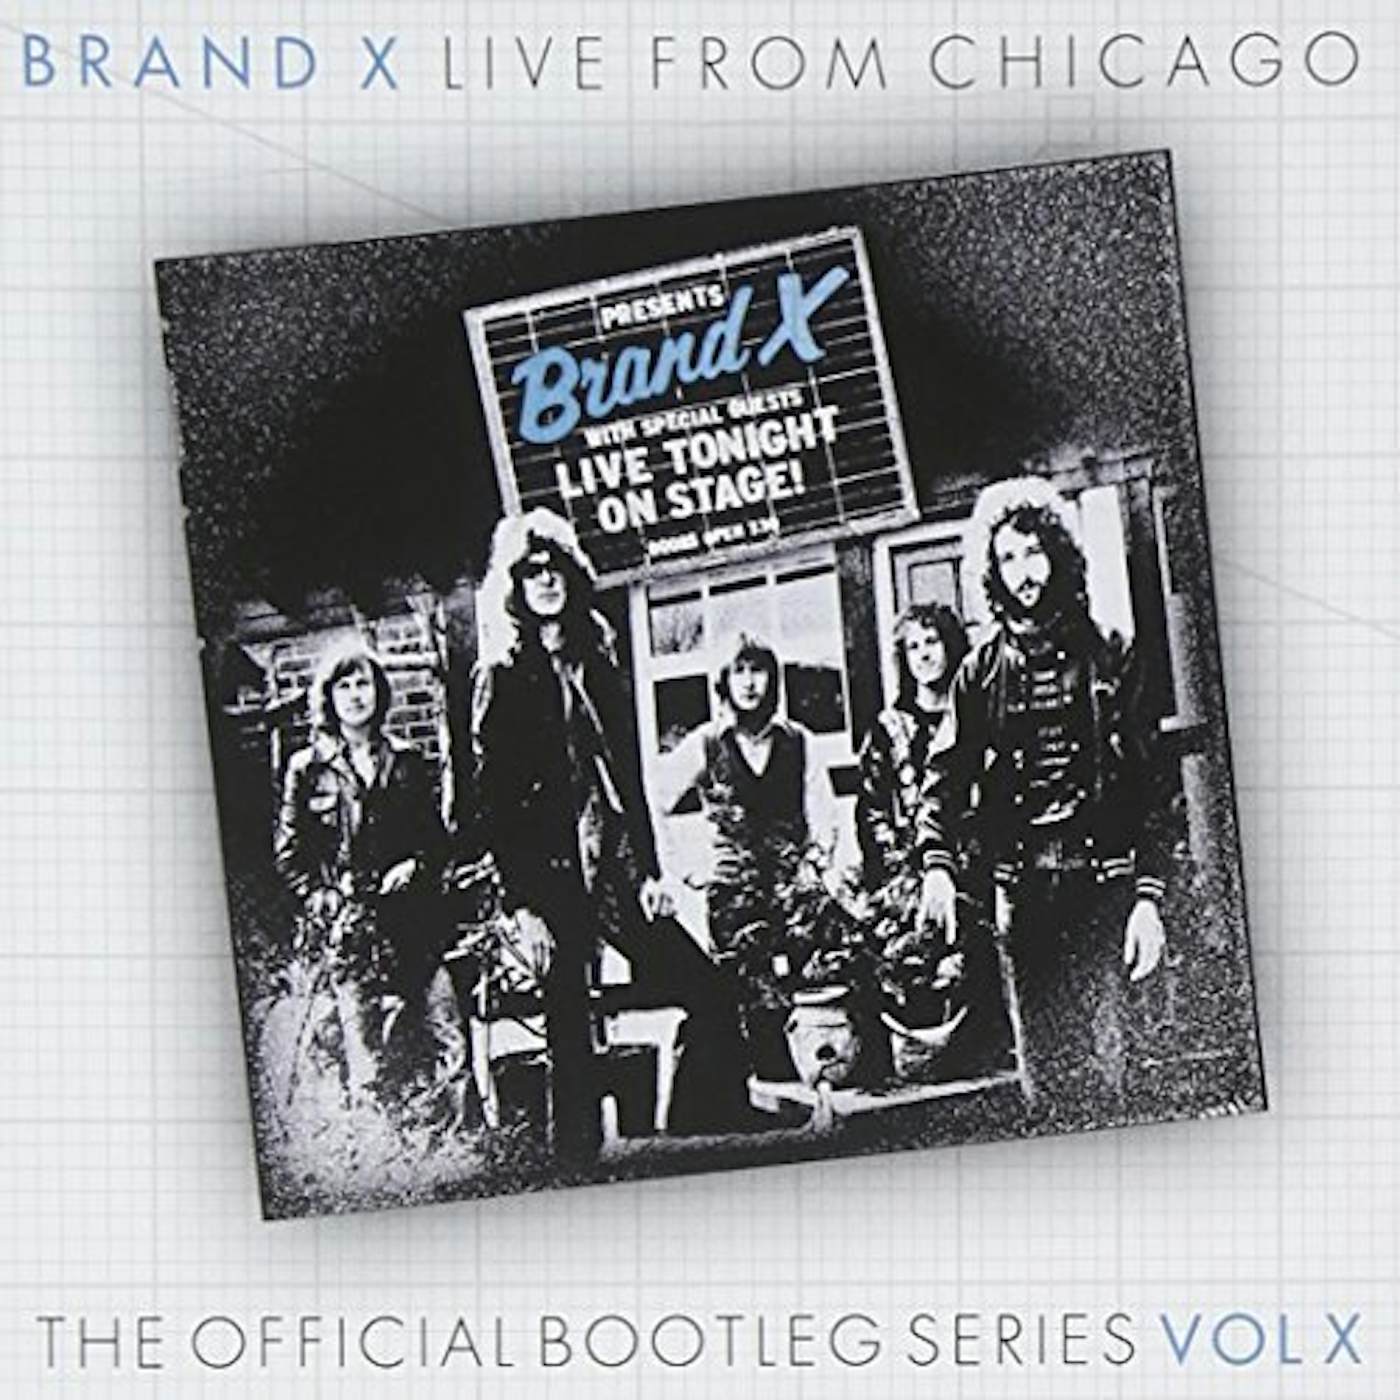 Brand X LIVE FROM CHICAGO 1978 CD